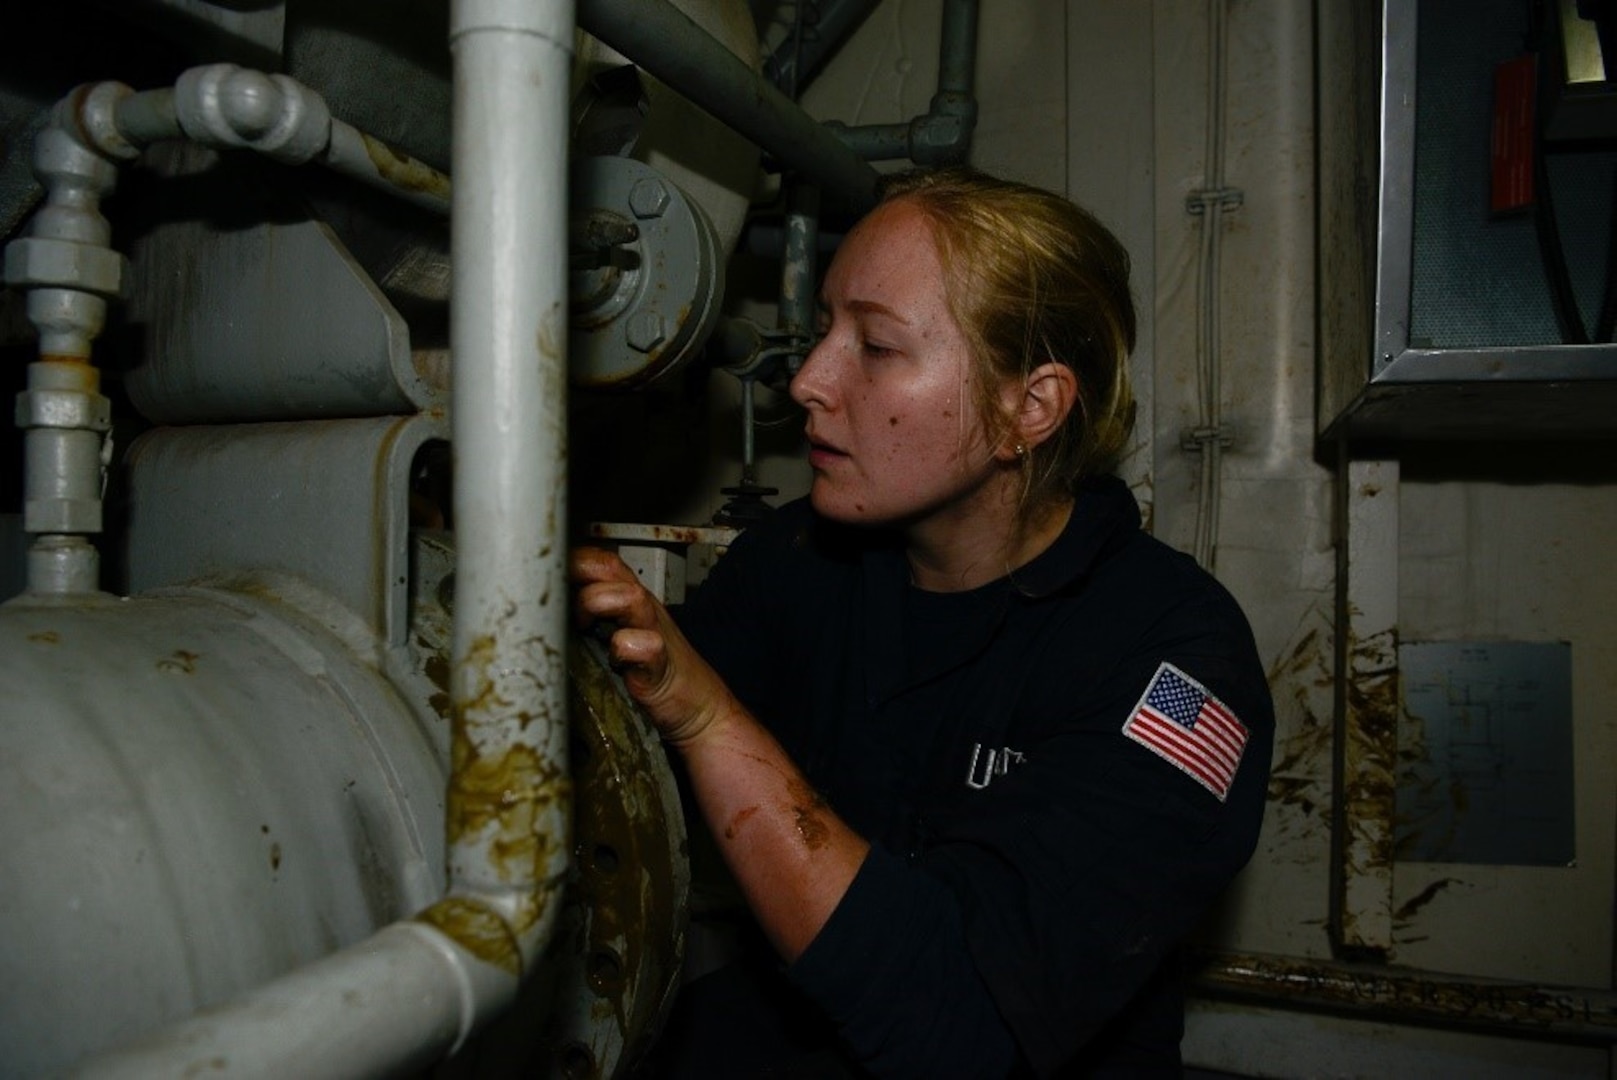 Petty Officer 2nd Class Leanne M. Rensch, winner of the Master Chief Petty Officer Pearl Faurie Women's Leadership Award, works on an air conditioner unit aboard the Coast Guard Cutter Hamilton Apr. 21, 2022. Photo by Petty Officer 2nd Class Sydney